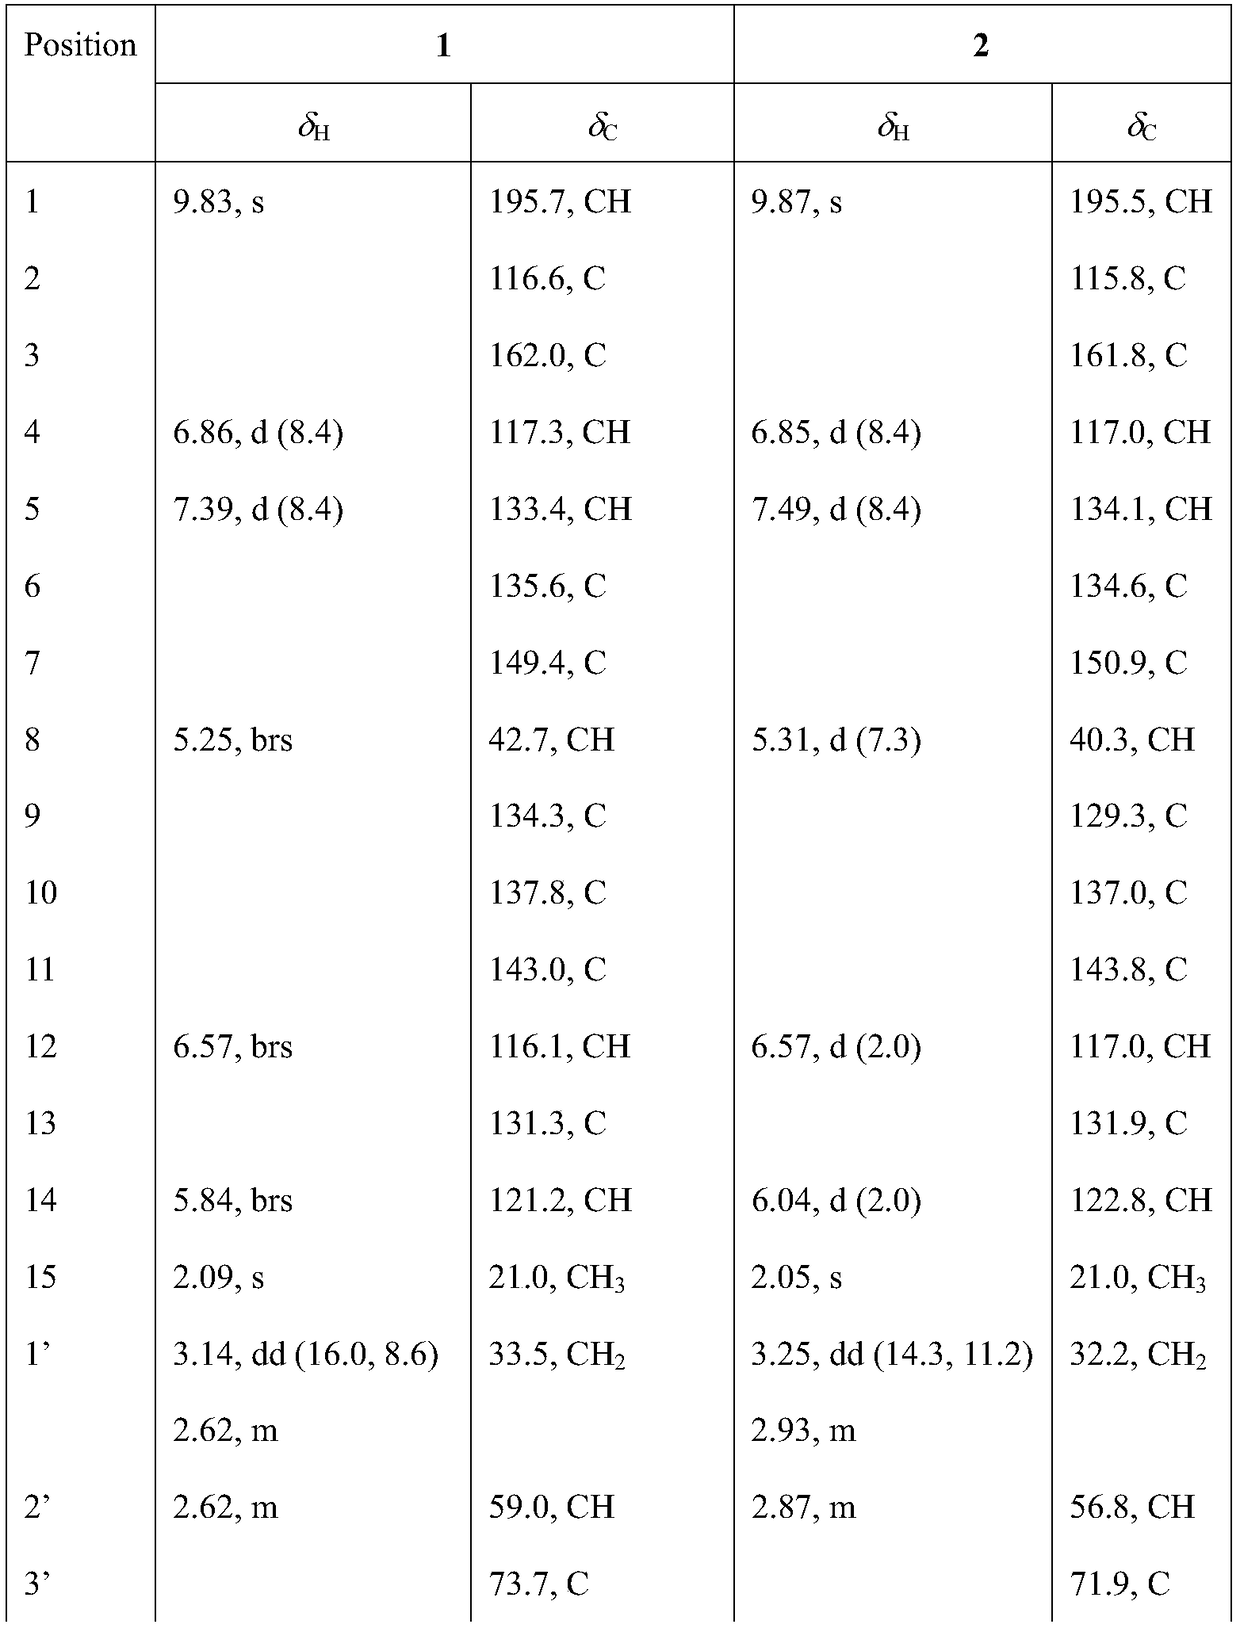 Excoecaria agallocha endophytic fungus sourced indene derivative, and applications thereof in preparation of anti-inflammatory drugs